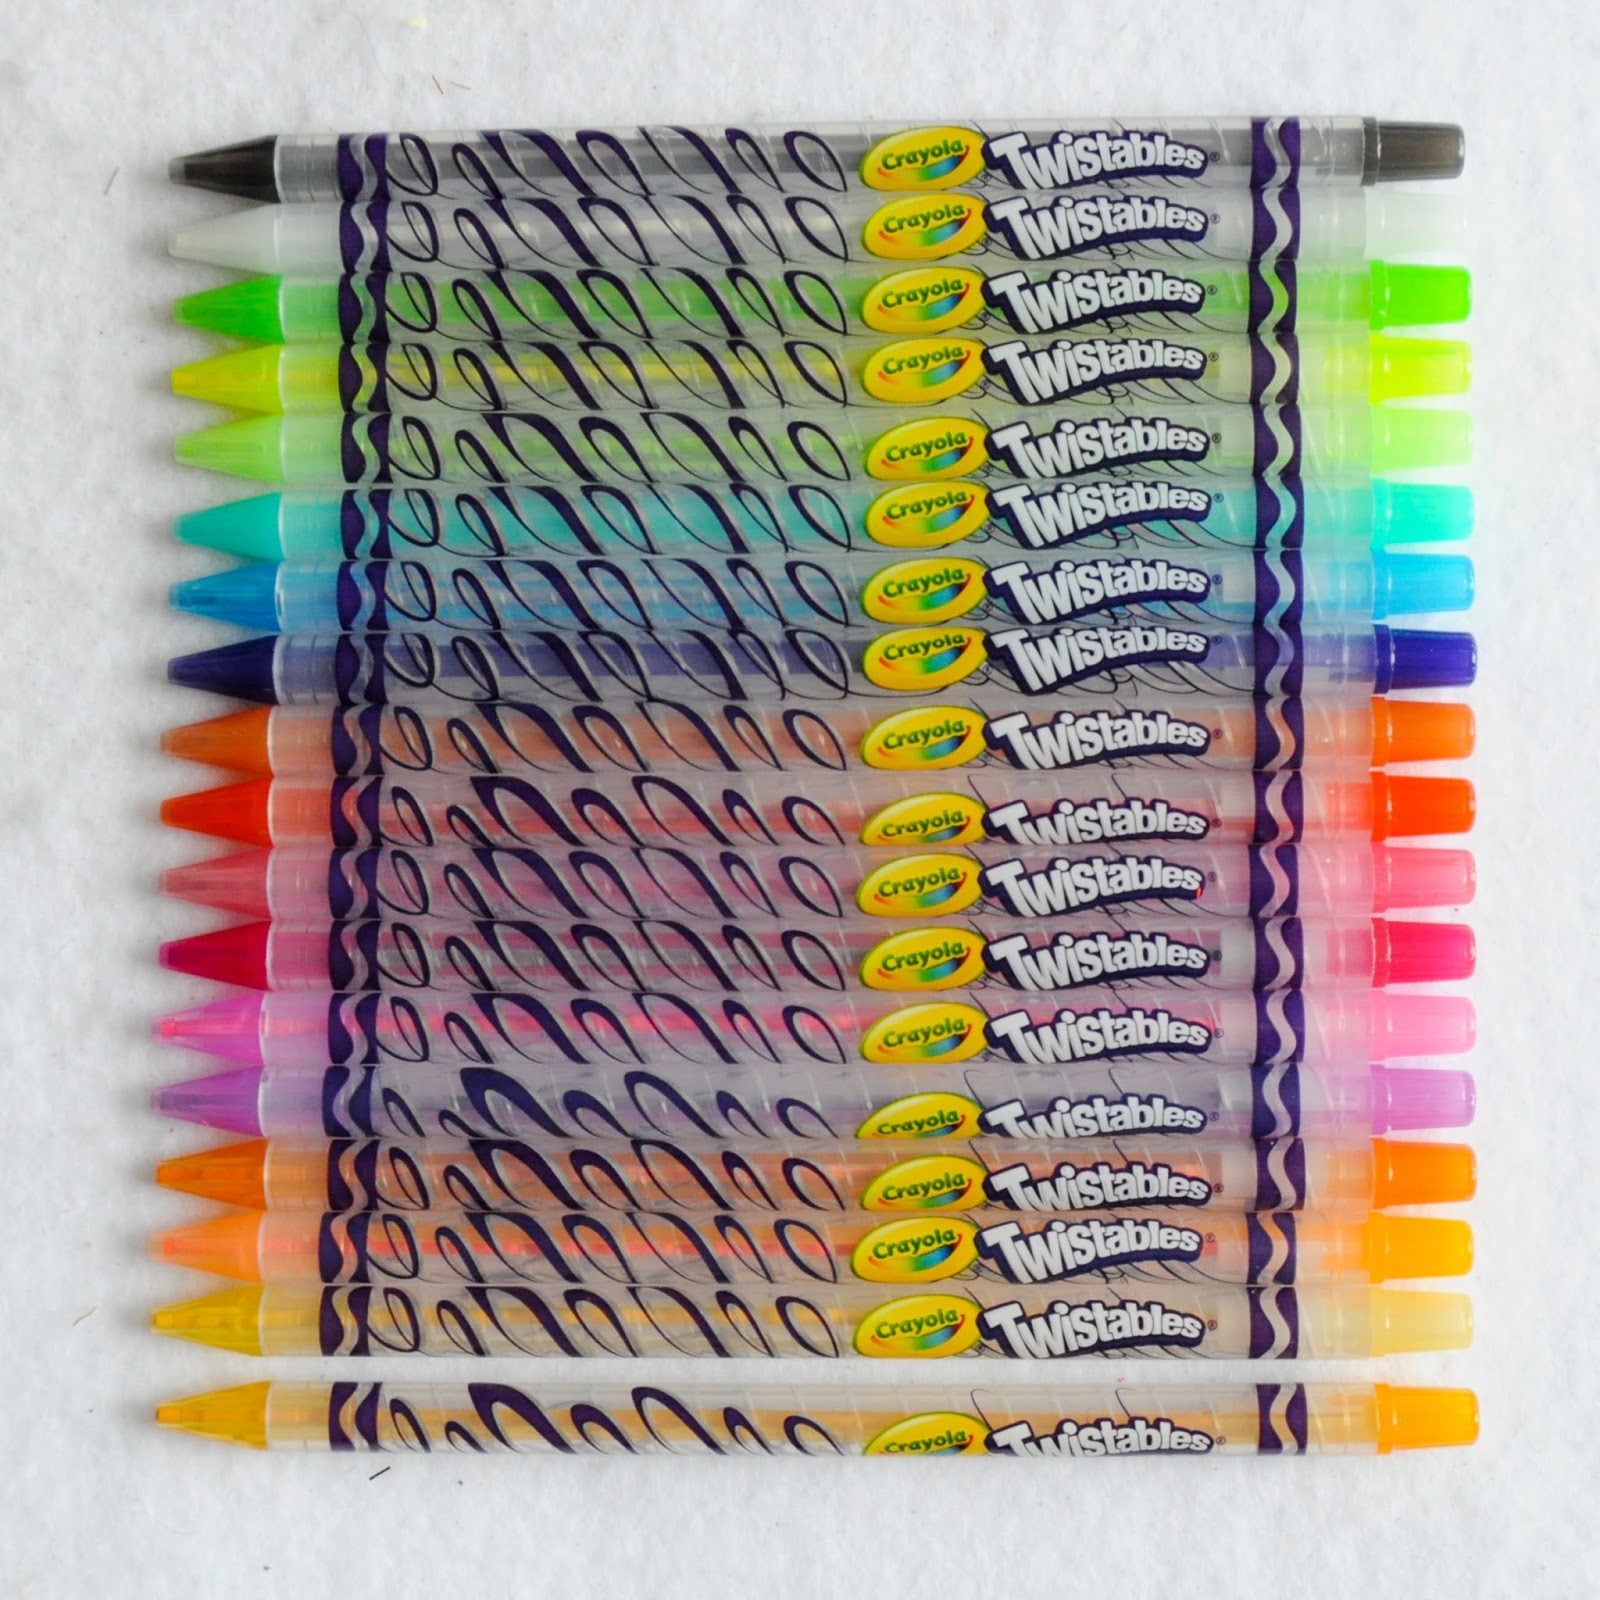 Crayola Twistables Colored Pencils with Color Alive: What's Inside the Box